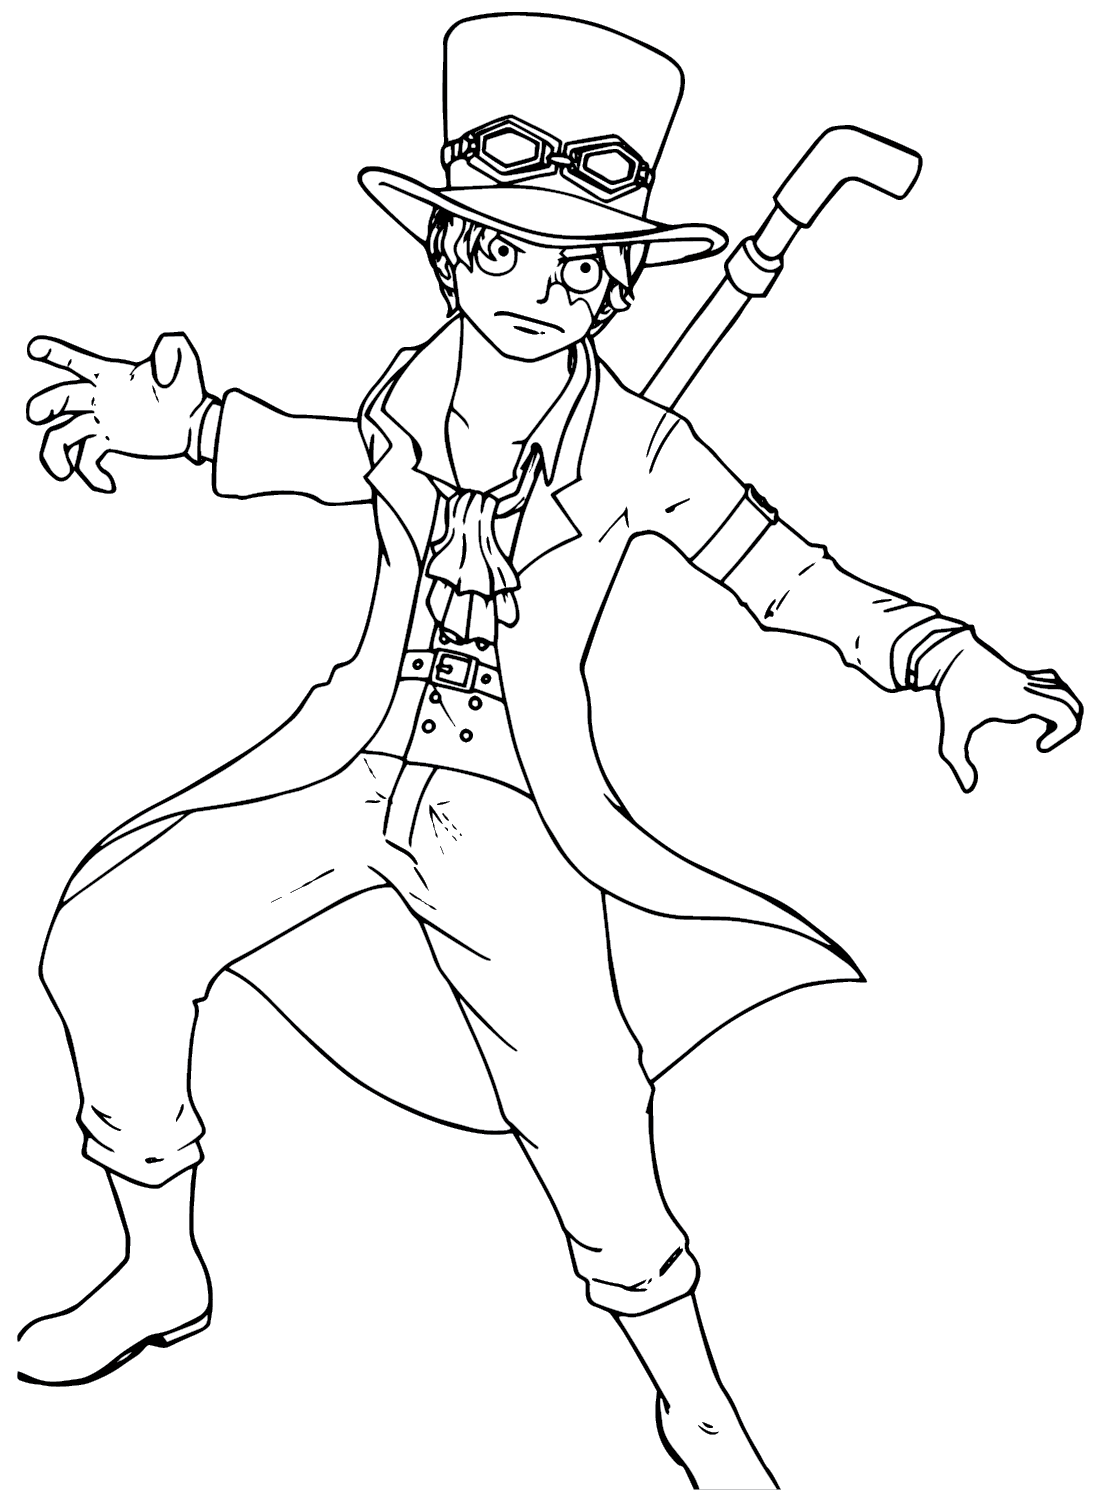 Sabo Picture to Color - Free Printable Coloring Pages